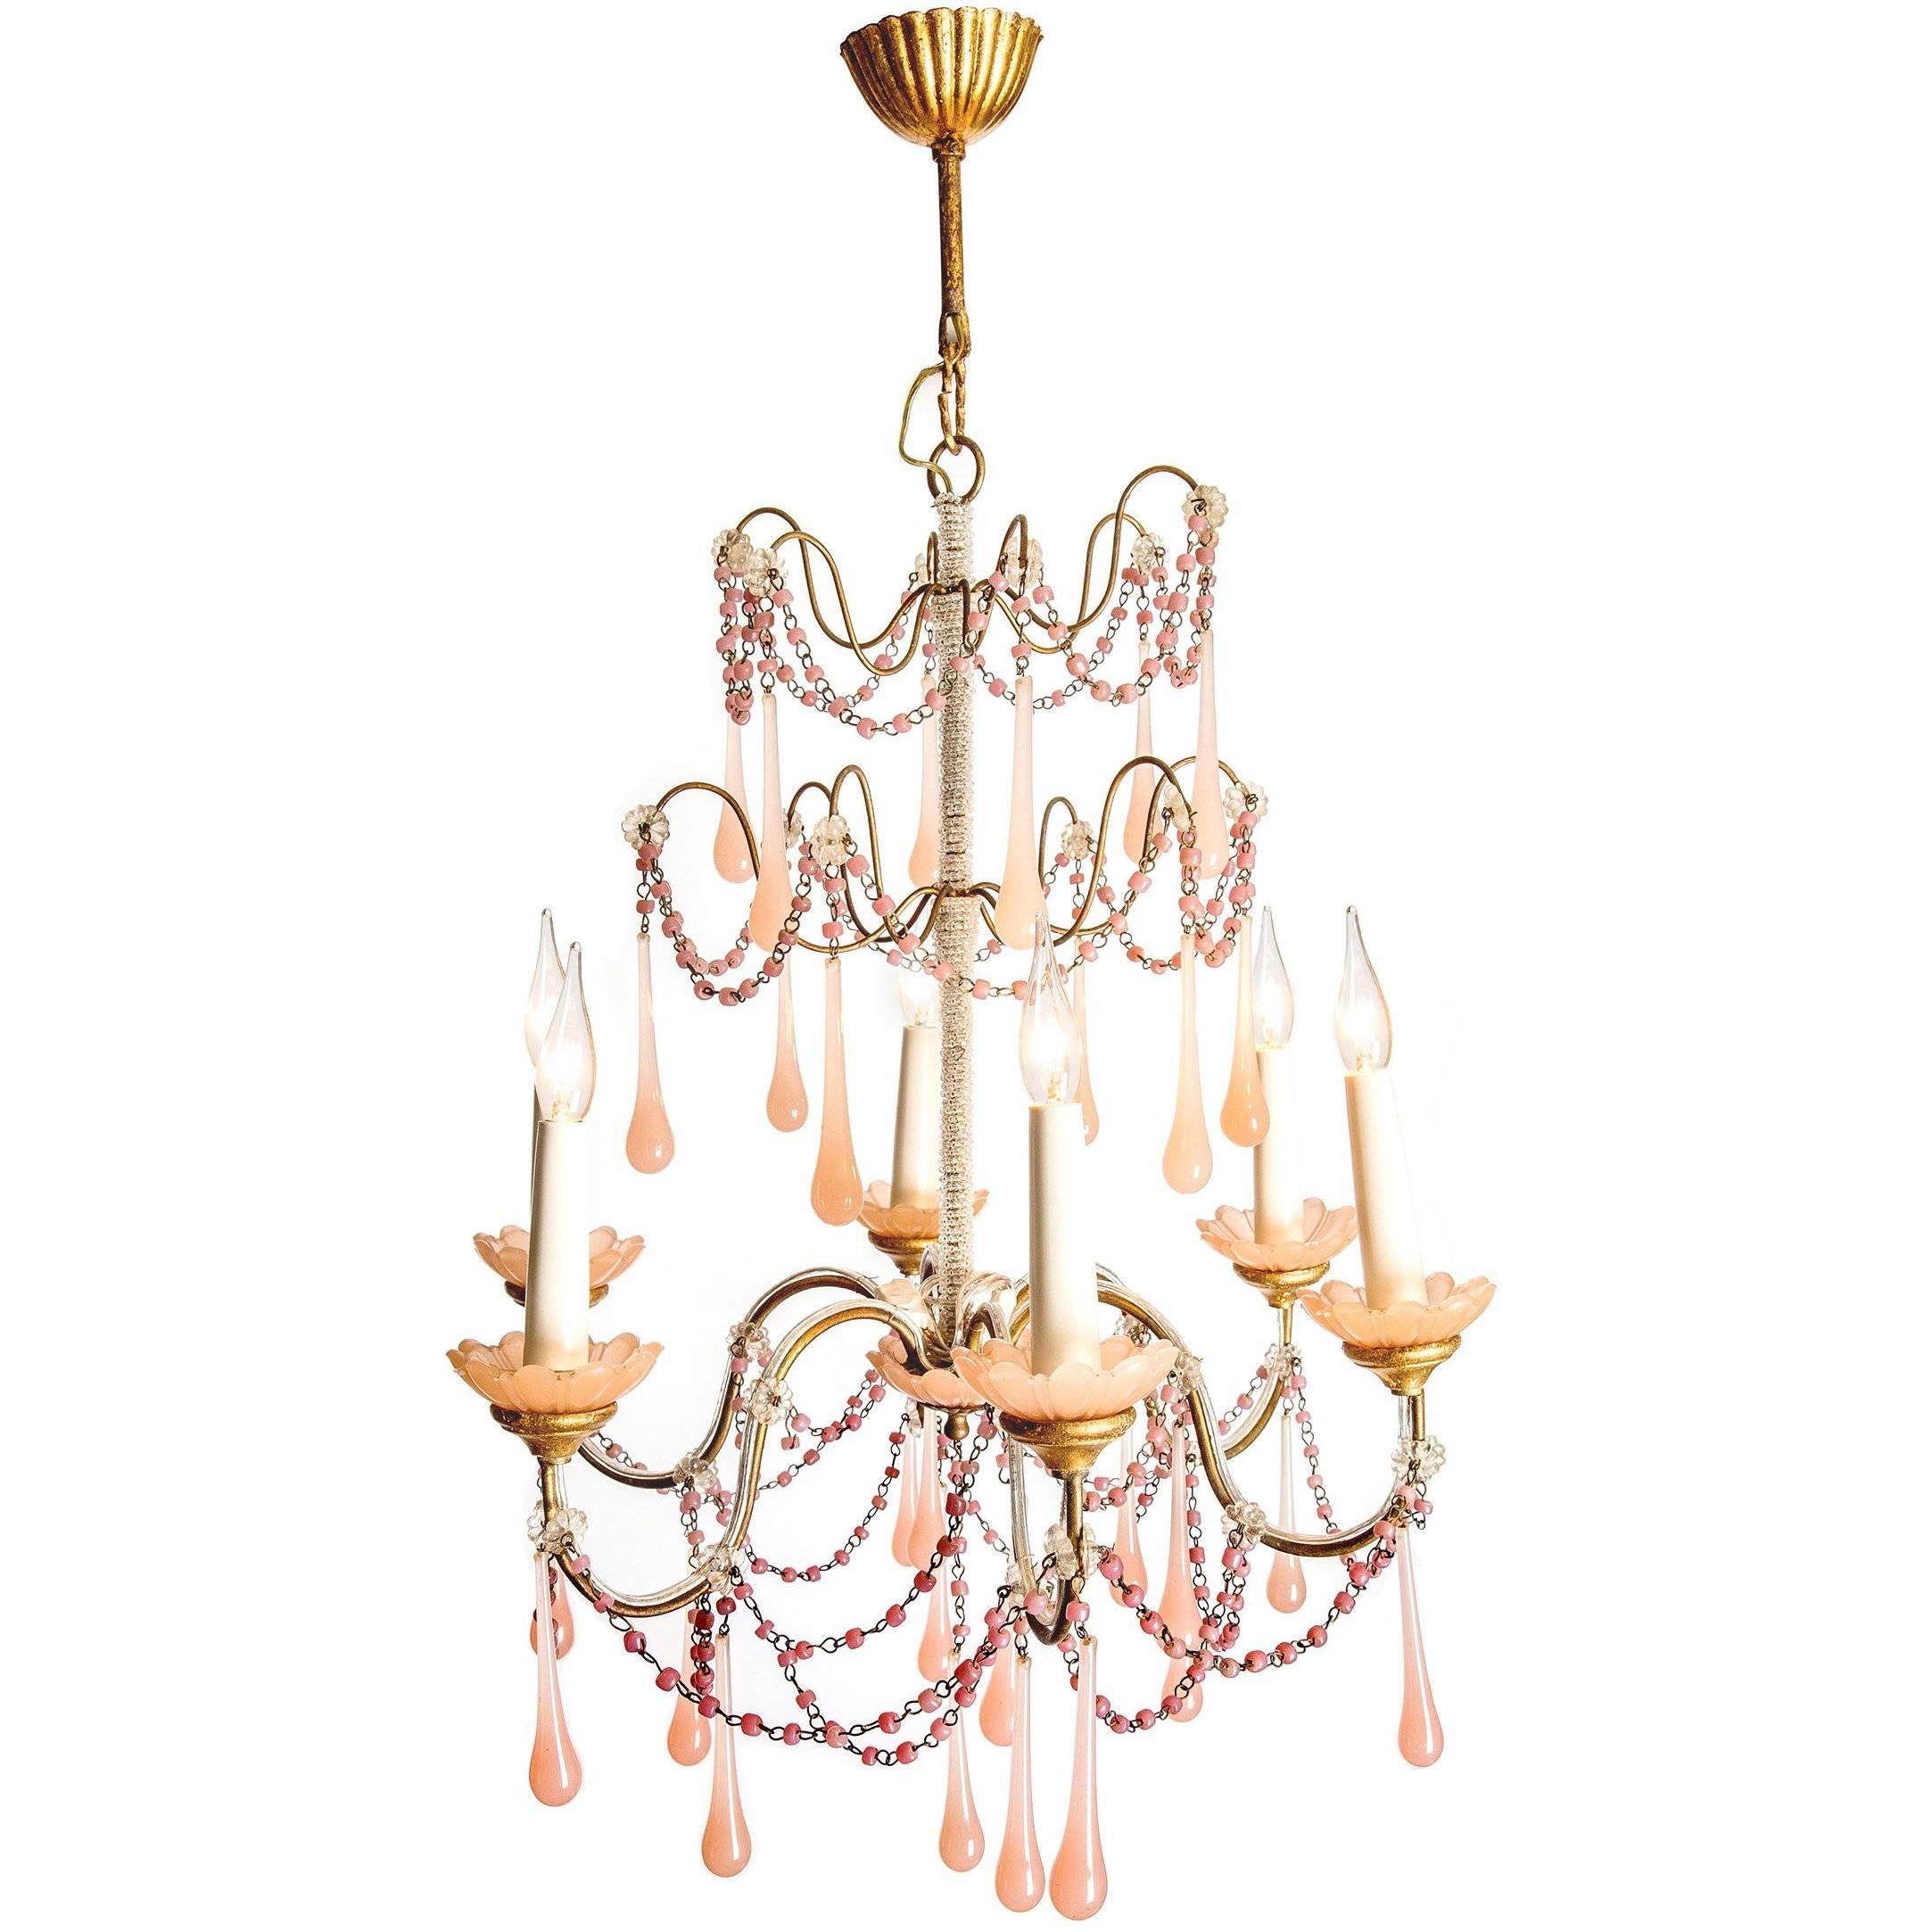 Boudoir Chandelier with Handblown Rose Glass Droplets and Beads, circa 1920